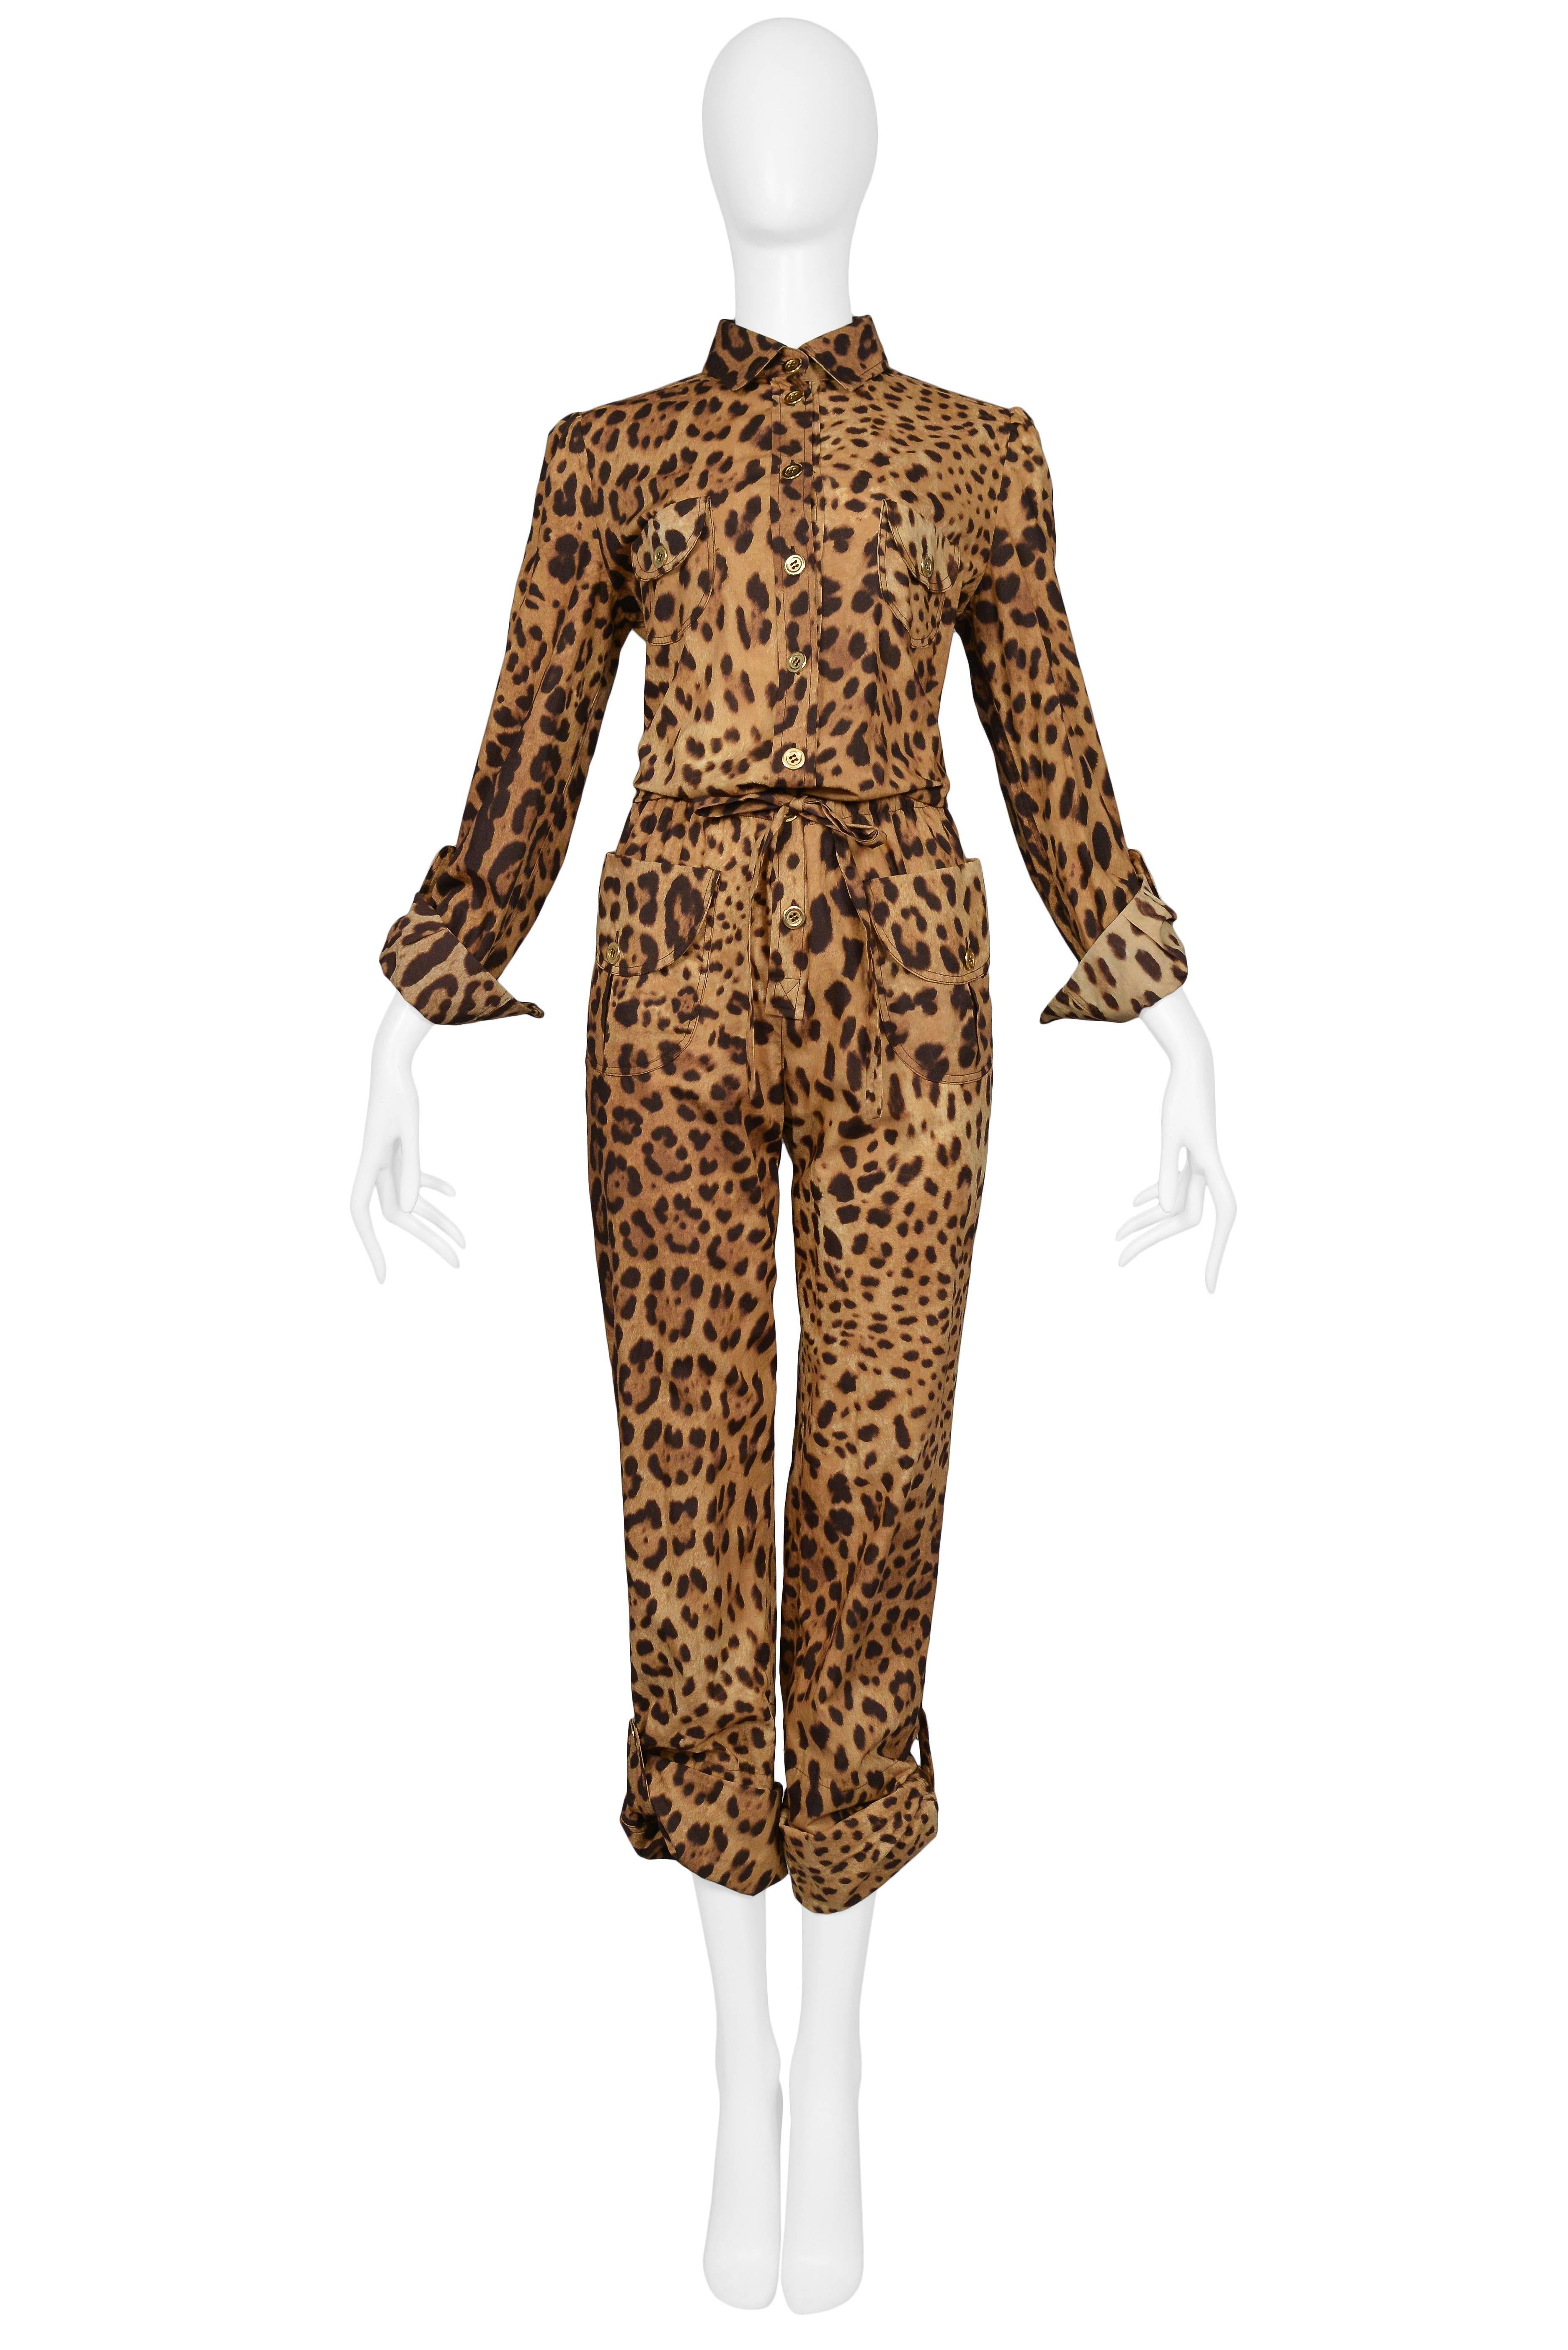 Dolce & Gabbana cotton leopard safari style belted jumpsuit with cargo pockets at front chest and hip, gold button front closure, cuff sleeves, and adjustable flap and button pant length. Slim fit and matching tie belt. 